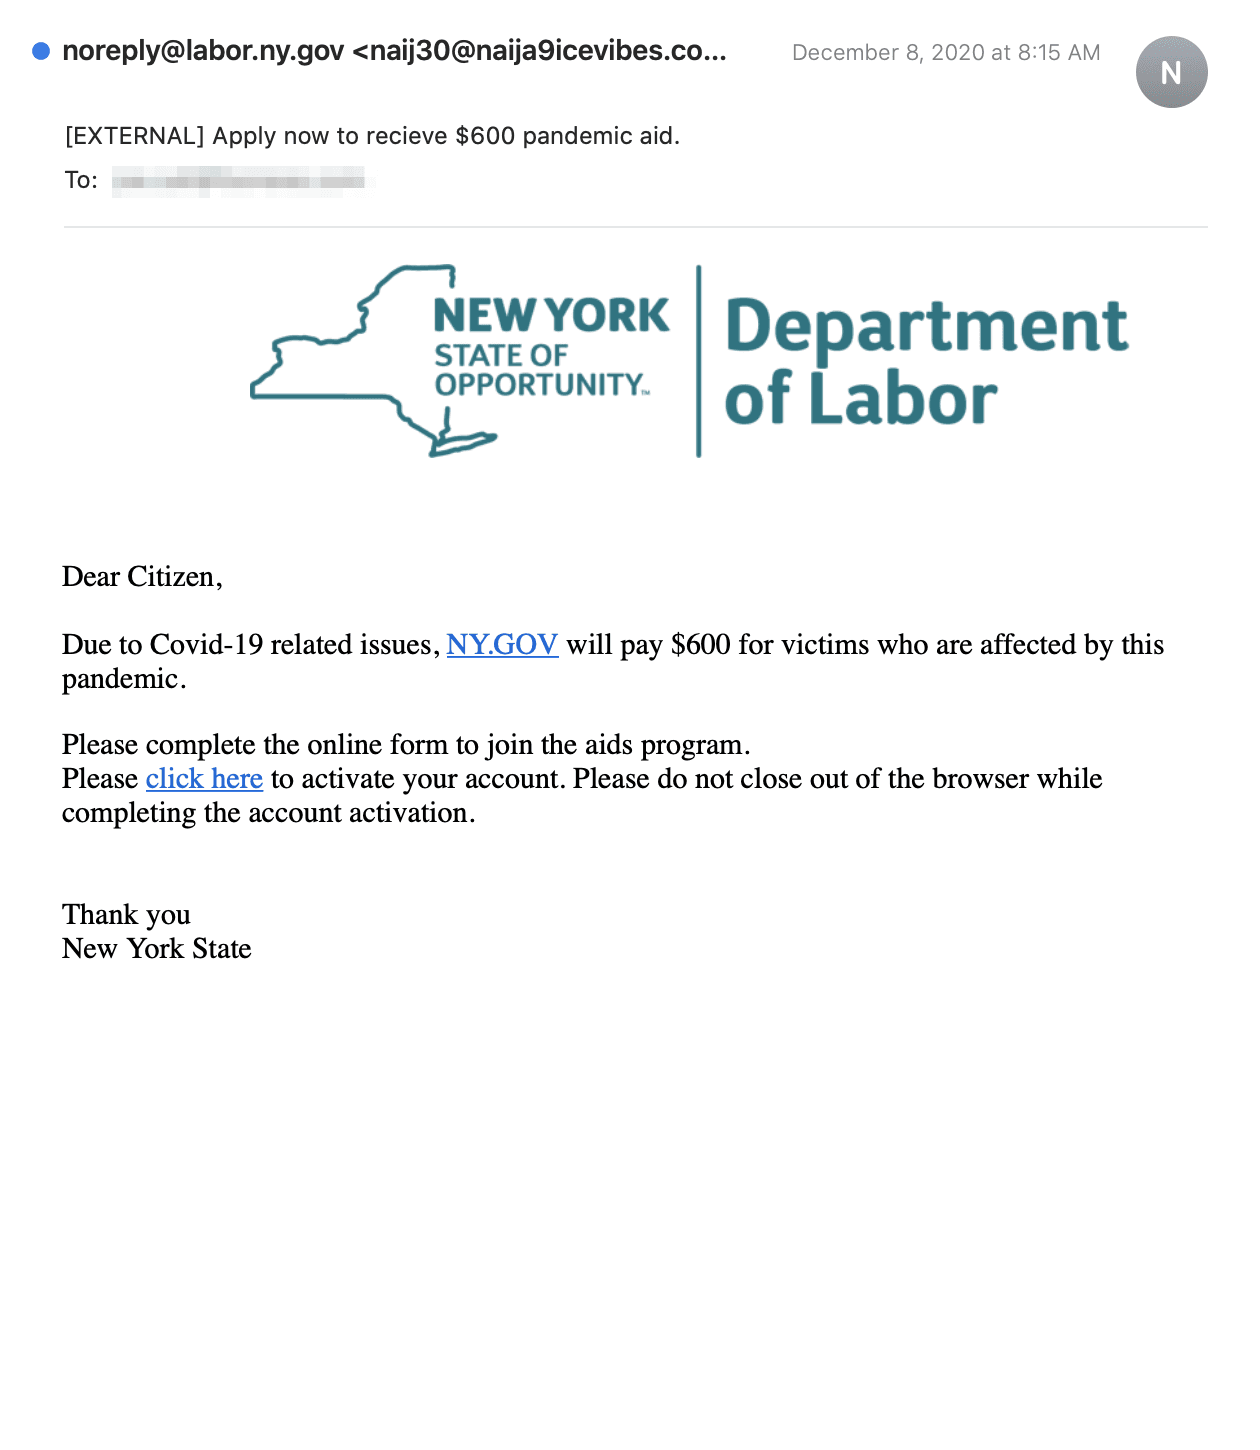 NY department of labor phishing scam